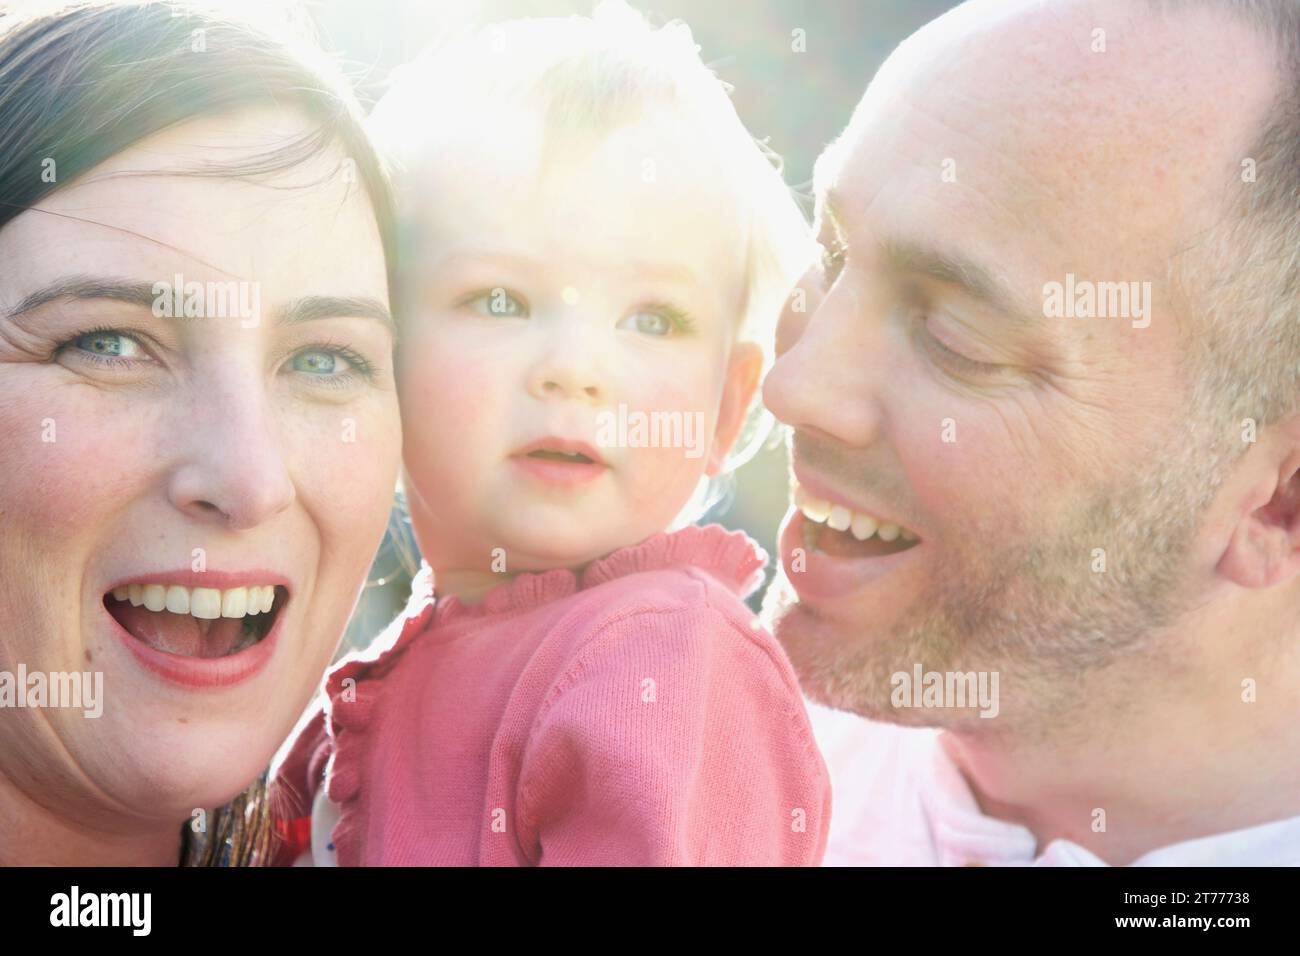 Portrait of Family Outdoors Smiling Stock Photo